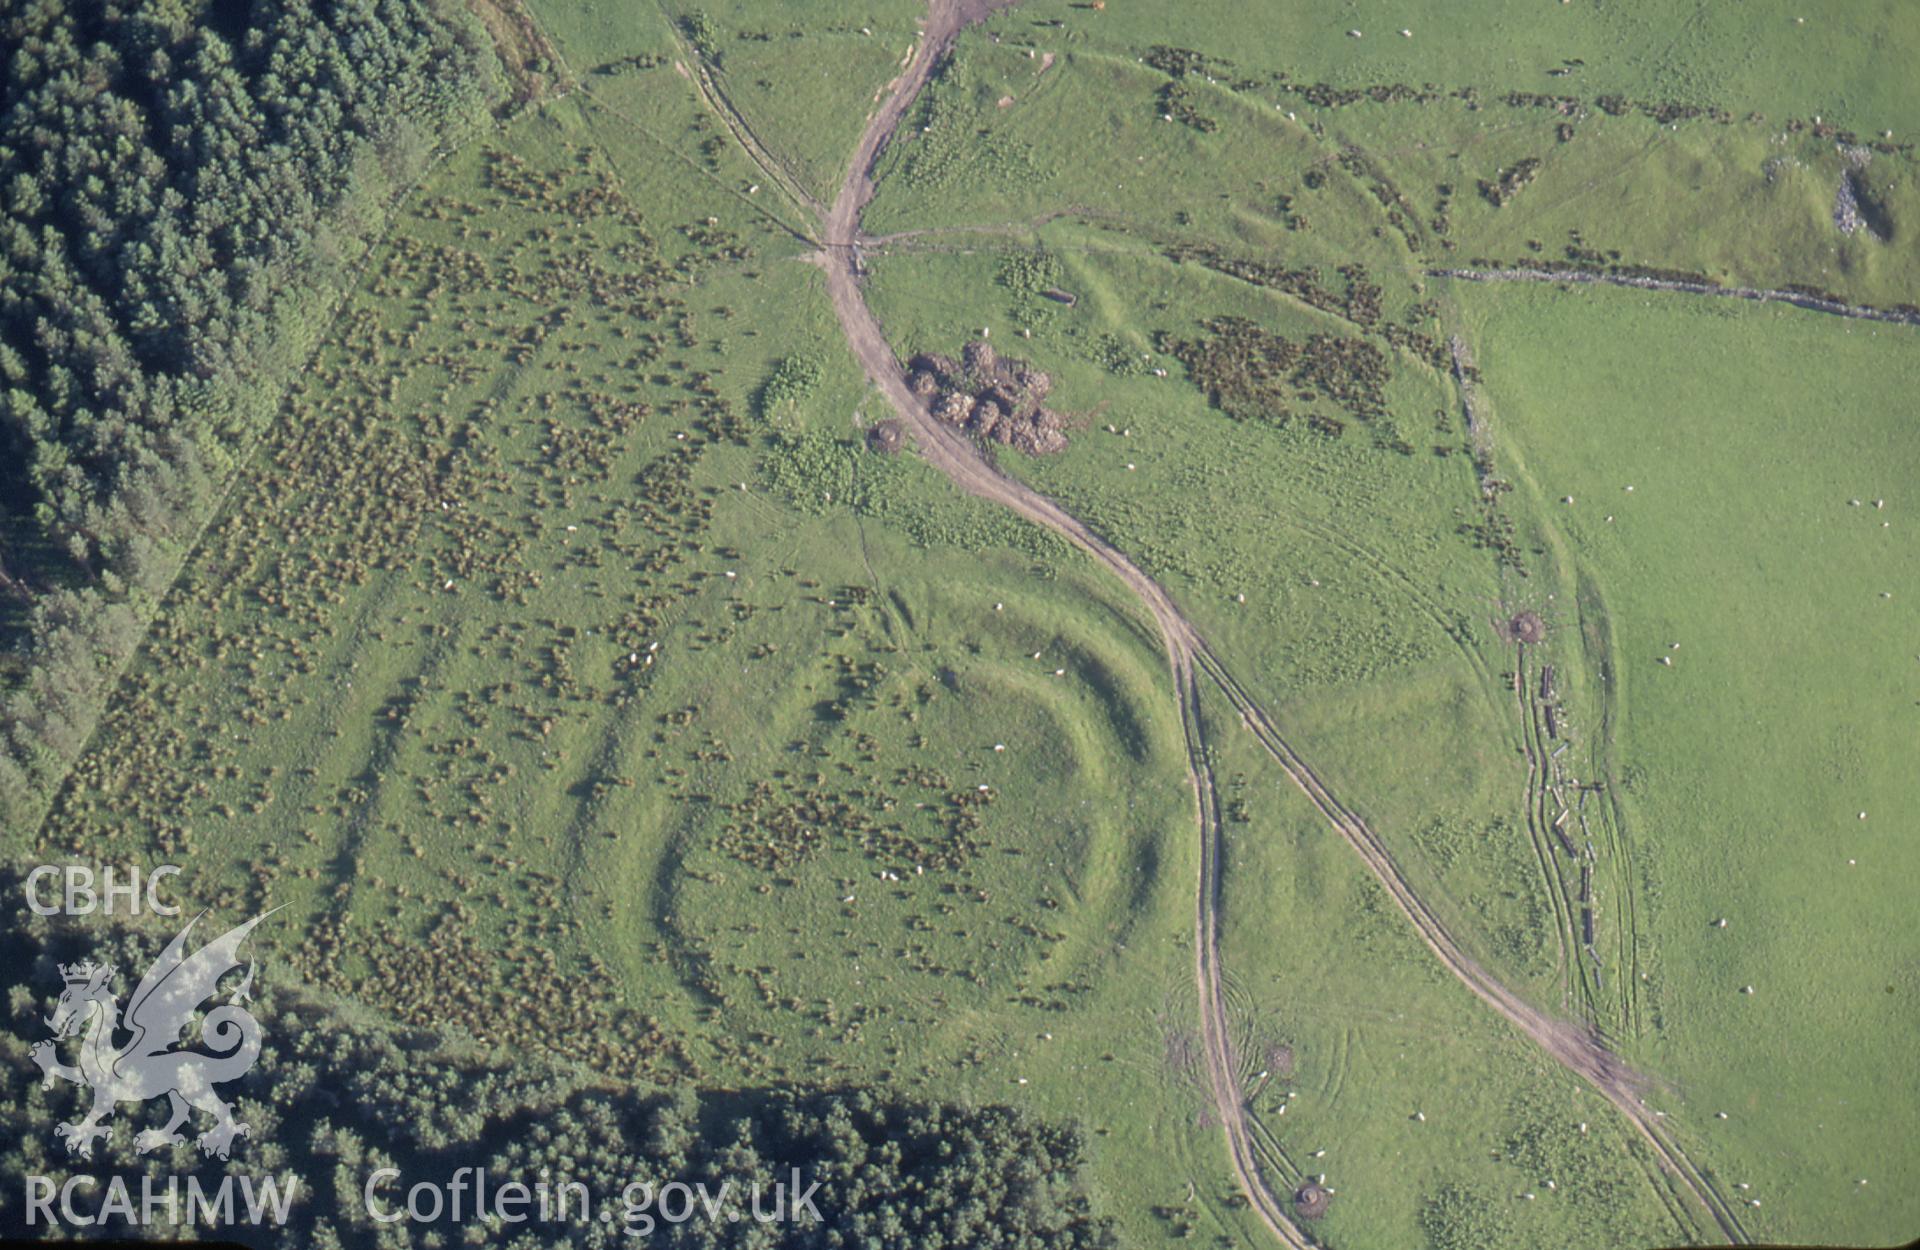 RCAHMW colour slide oblique aerial photograph of Gaer Fawr, Briton Ferry, taken by T.G.Driver on the 18/07/2000